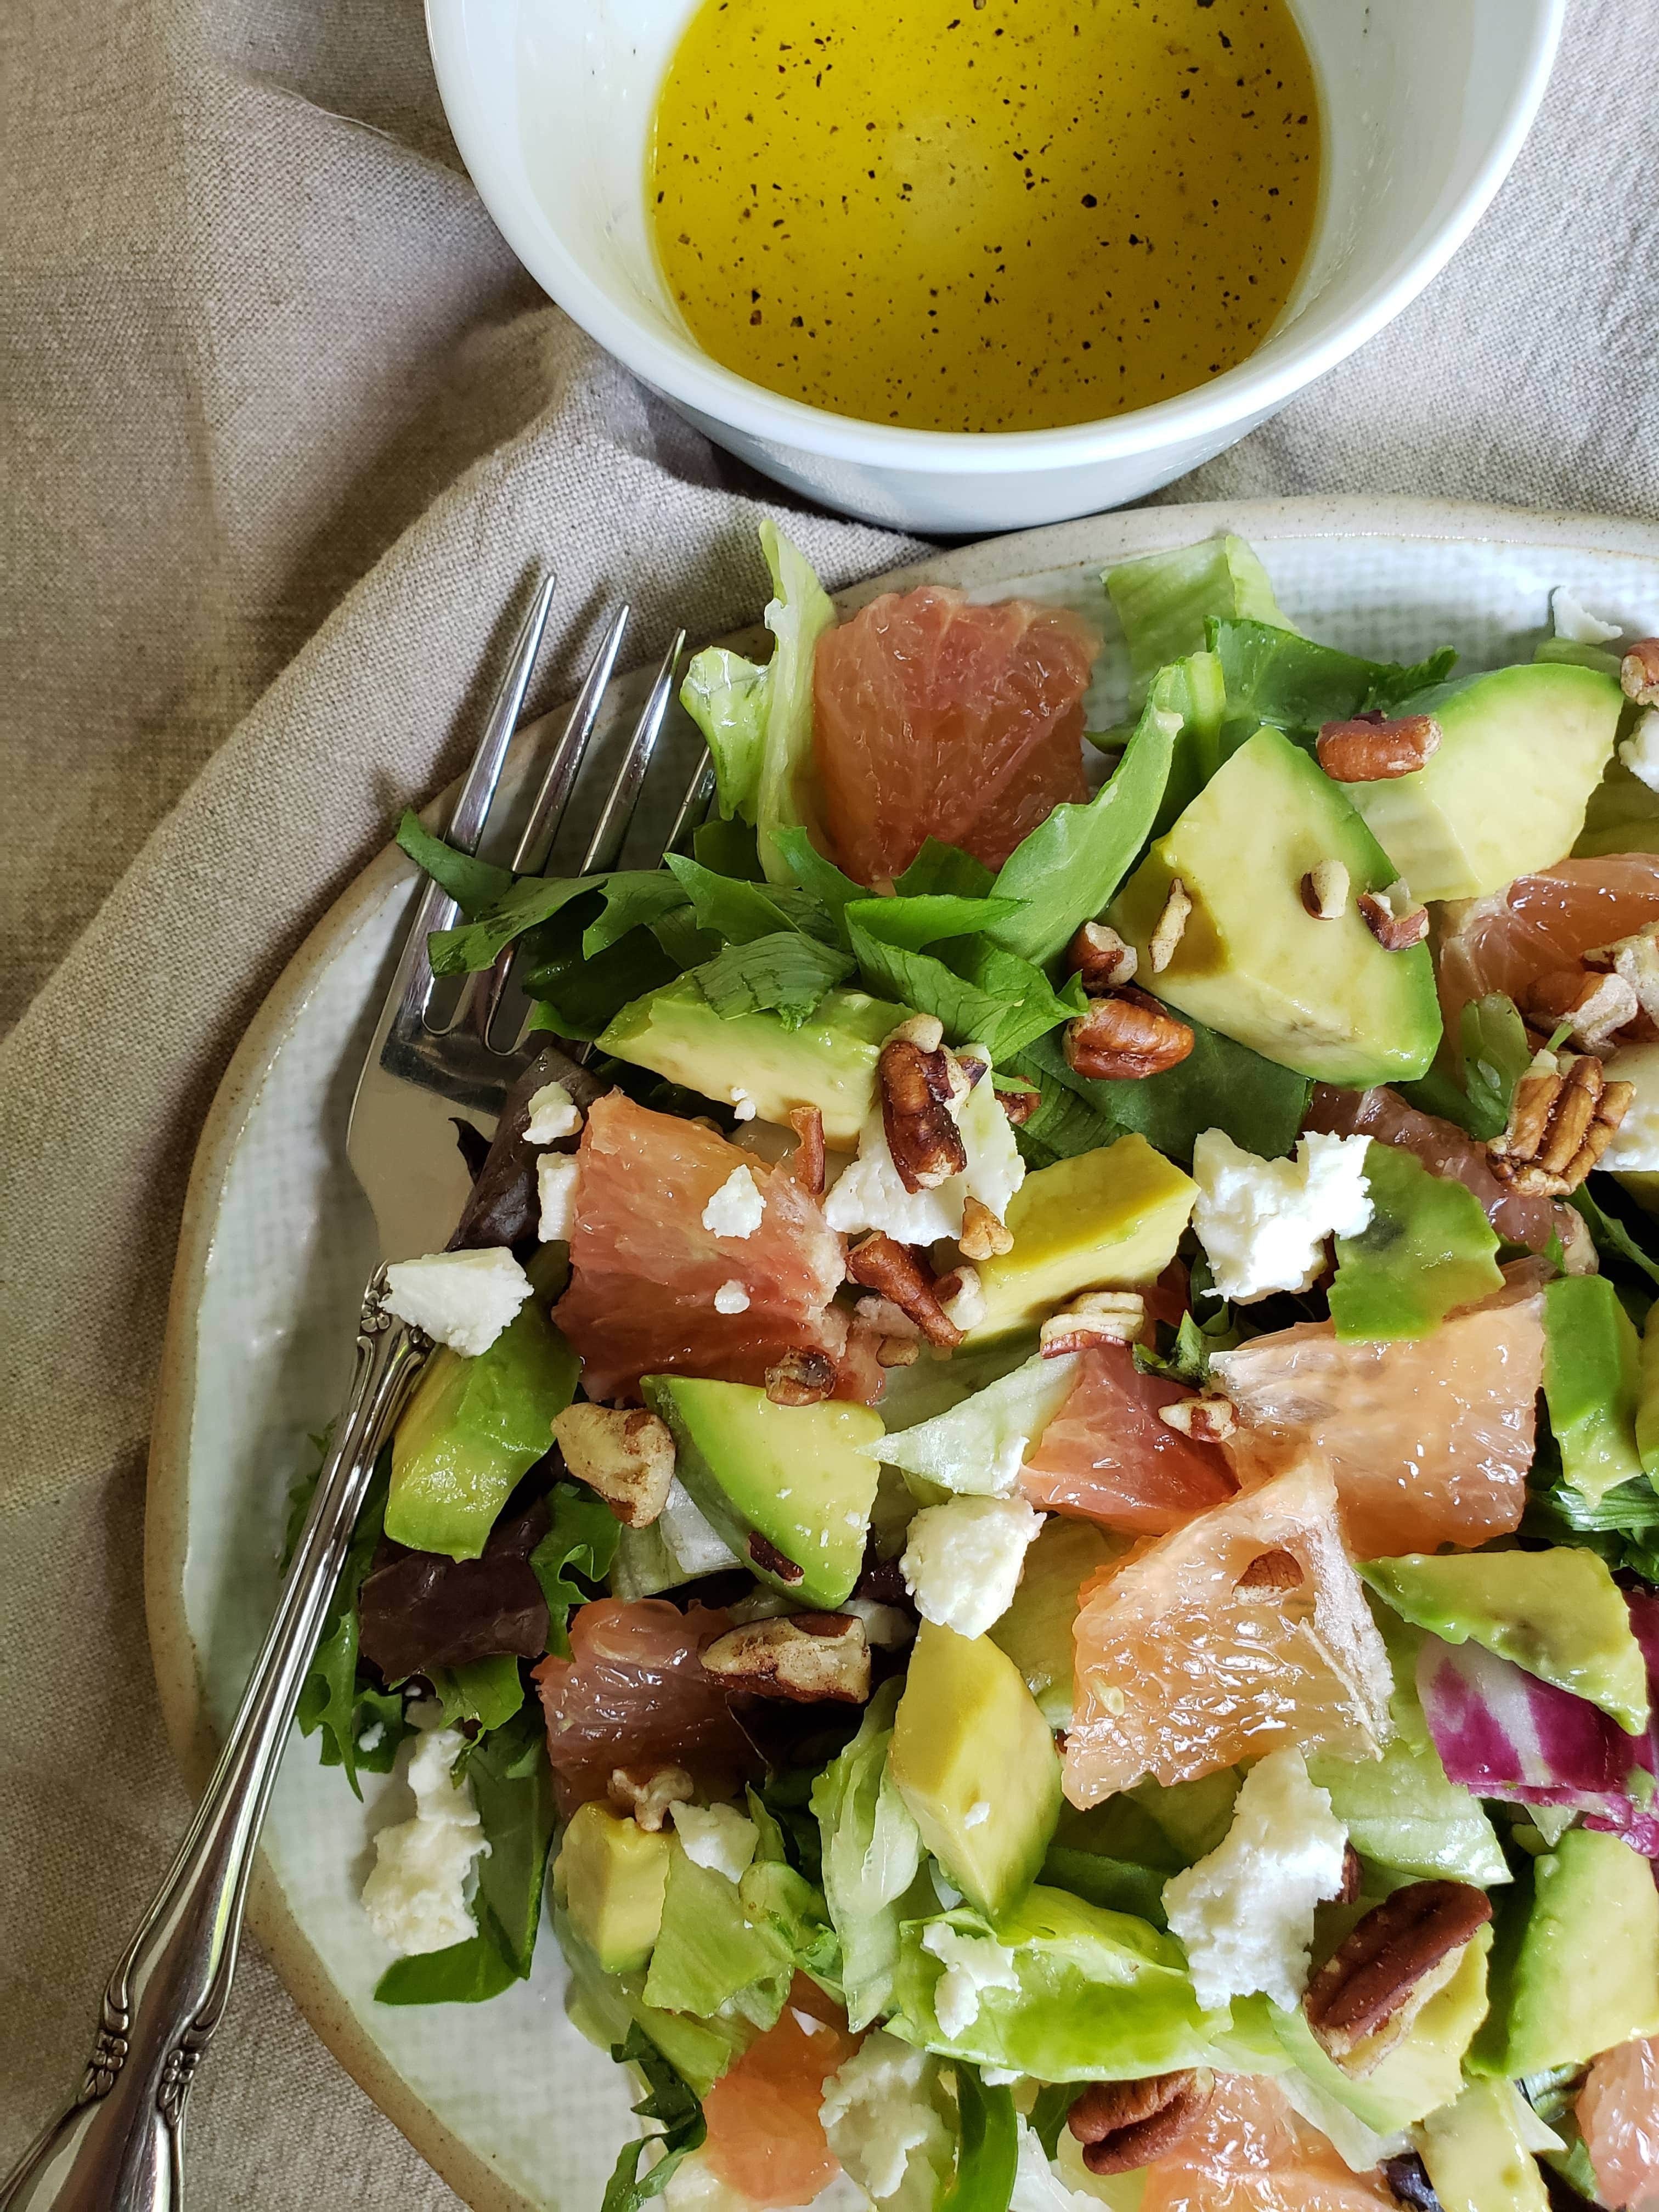 Grapefruit and Avocado Salad with Goat Cheese